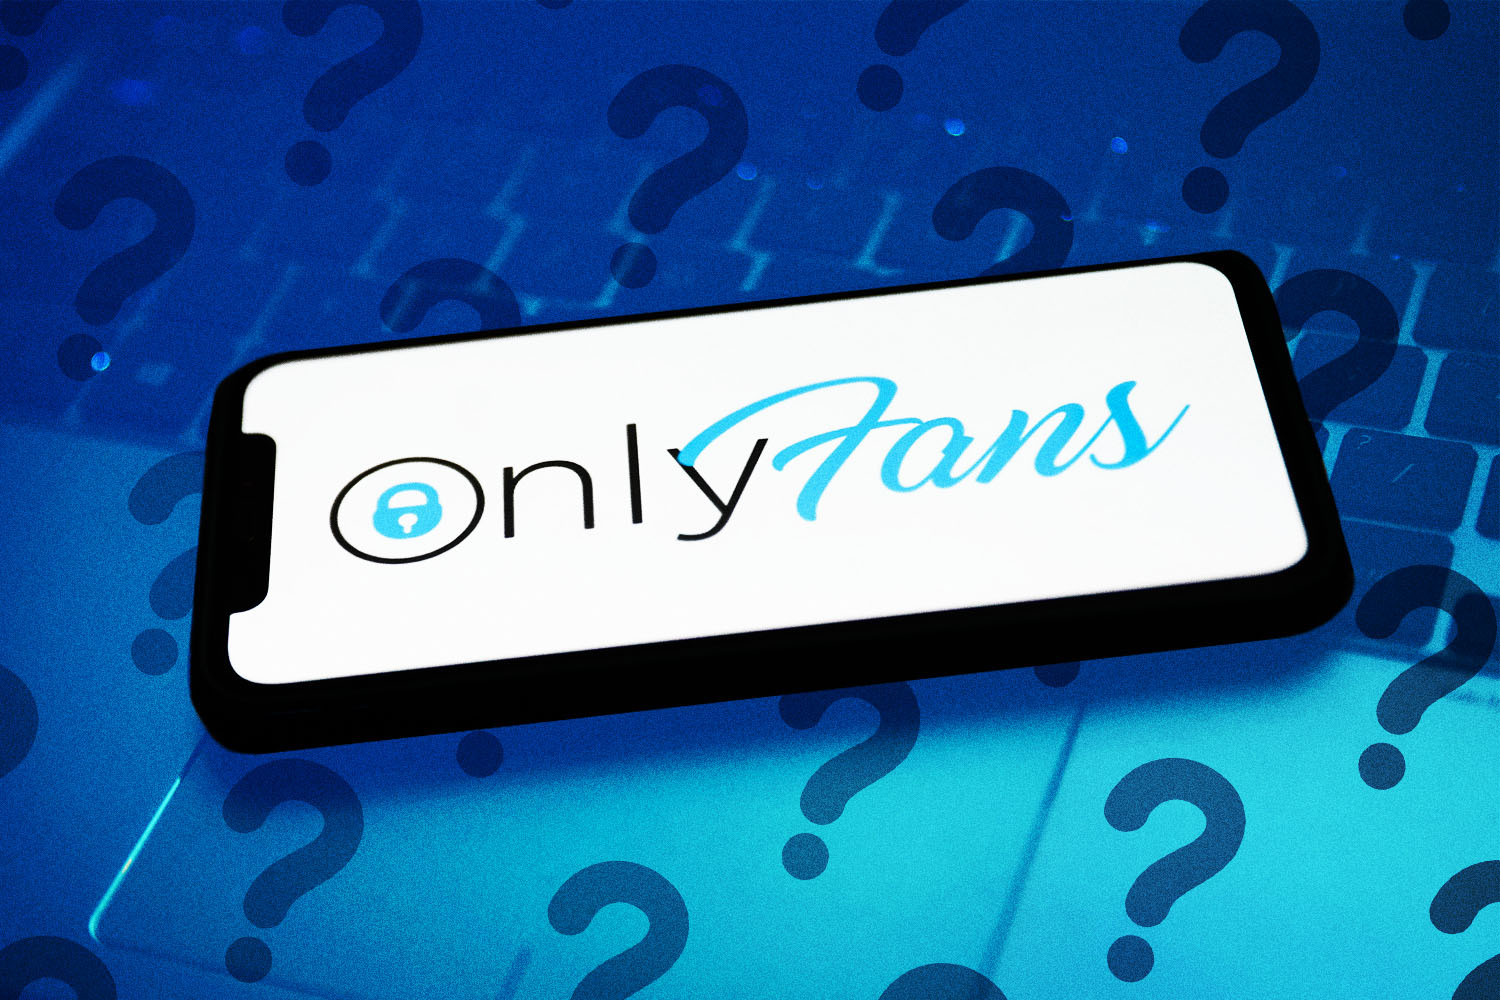 Onlyfans logo on phone screen